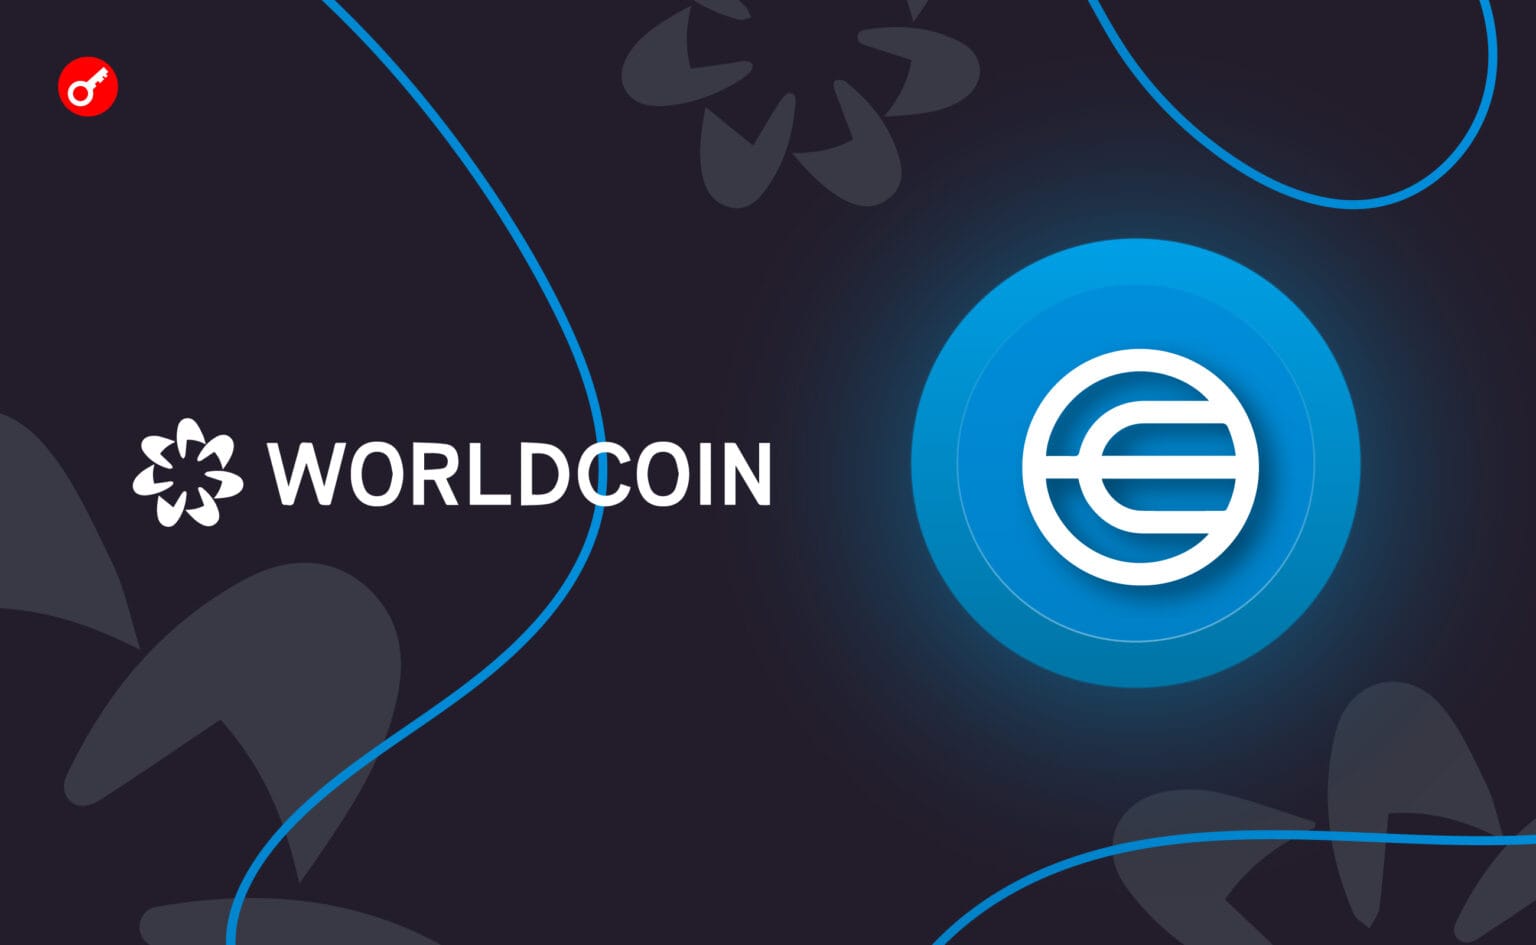 Media: the Portuguese regulator will limit the work of Worldcoin for 90 days